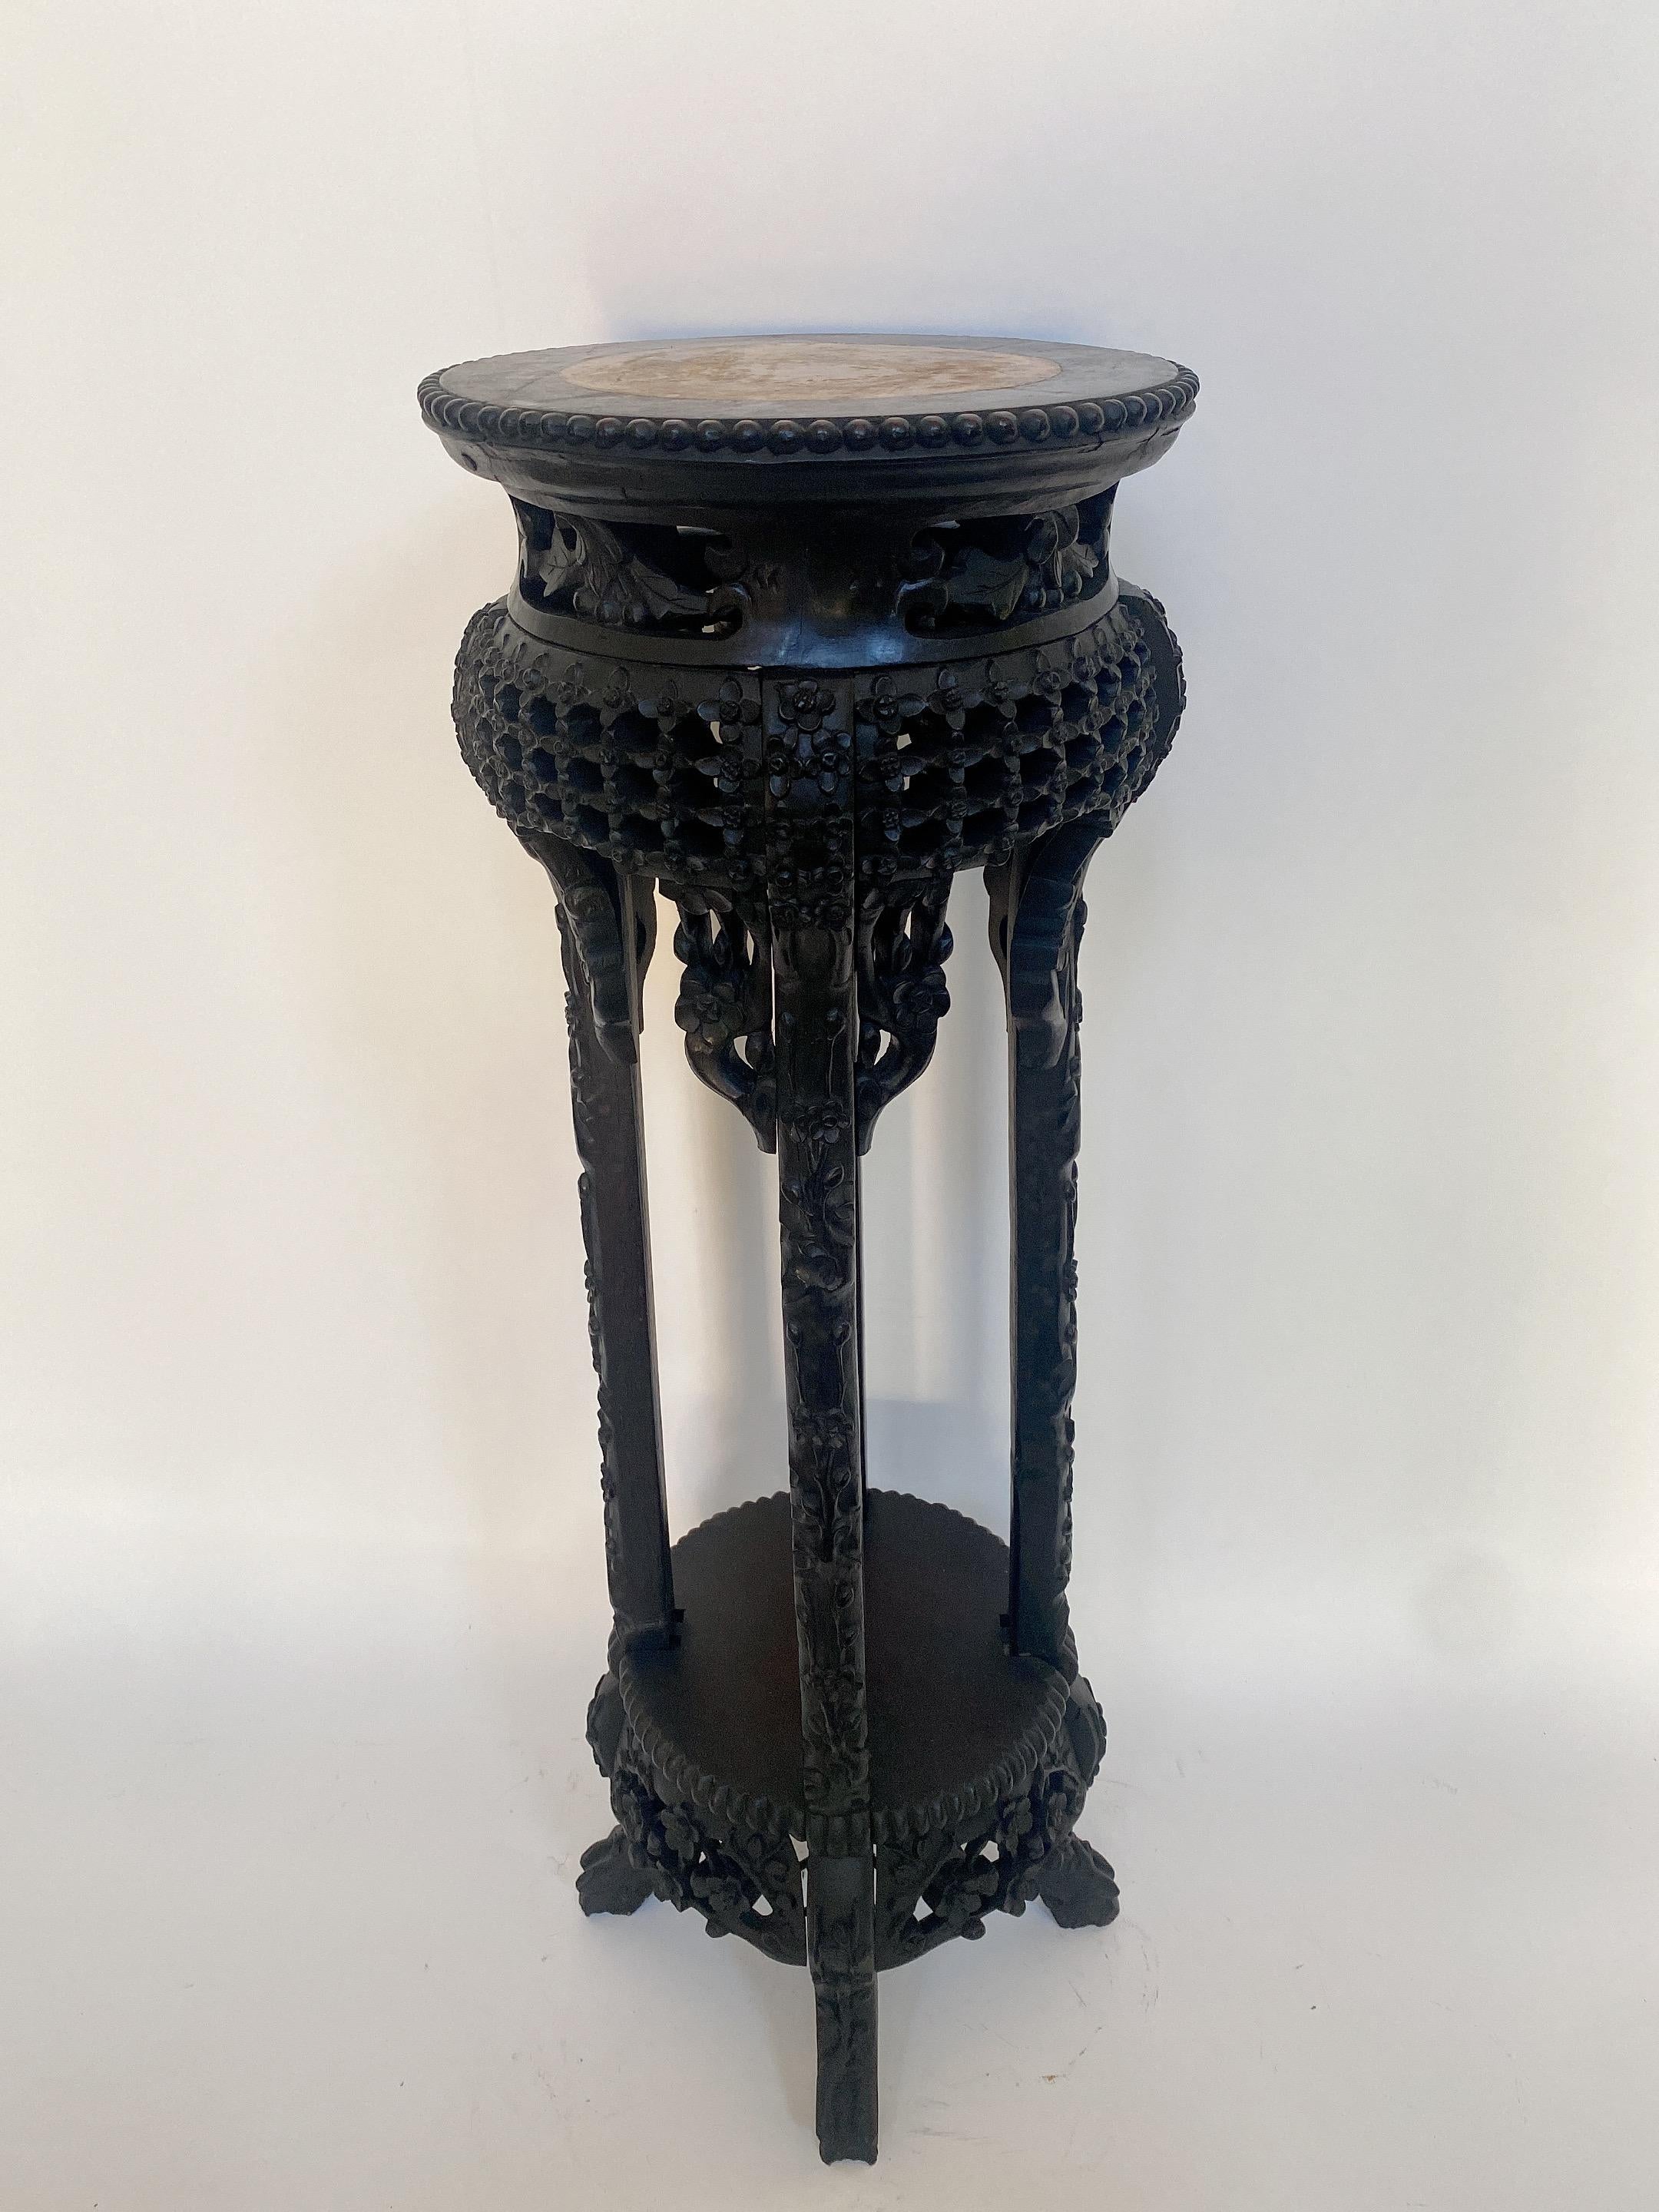 A 19th century antique tall Chinese heavily carved hardwood circular stand table with rouge marble top insert, the inset marble top over carved hardwood apron with beaded trim, fancy caved legs with lower shelf, dimensions: 34'' inches height x